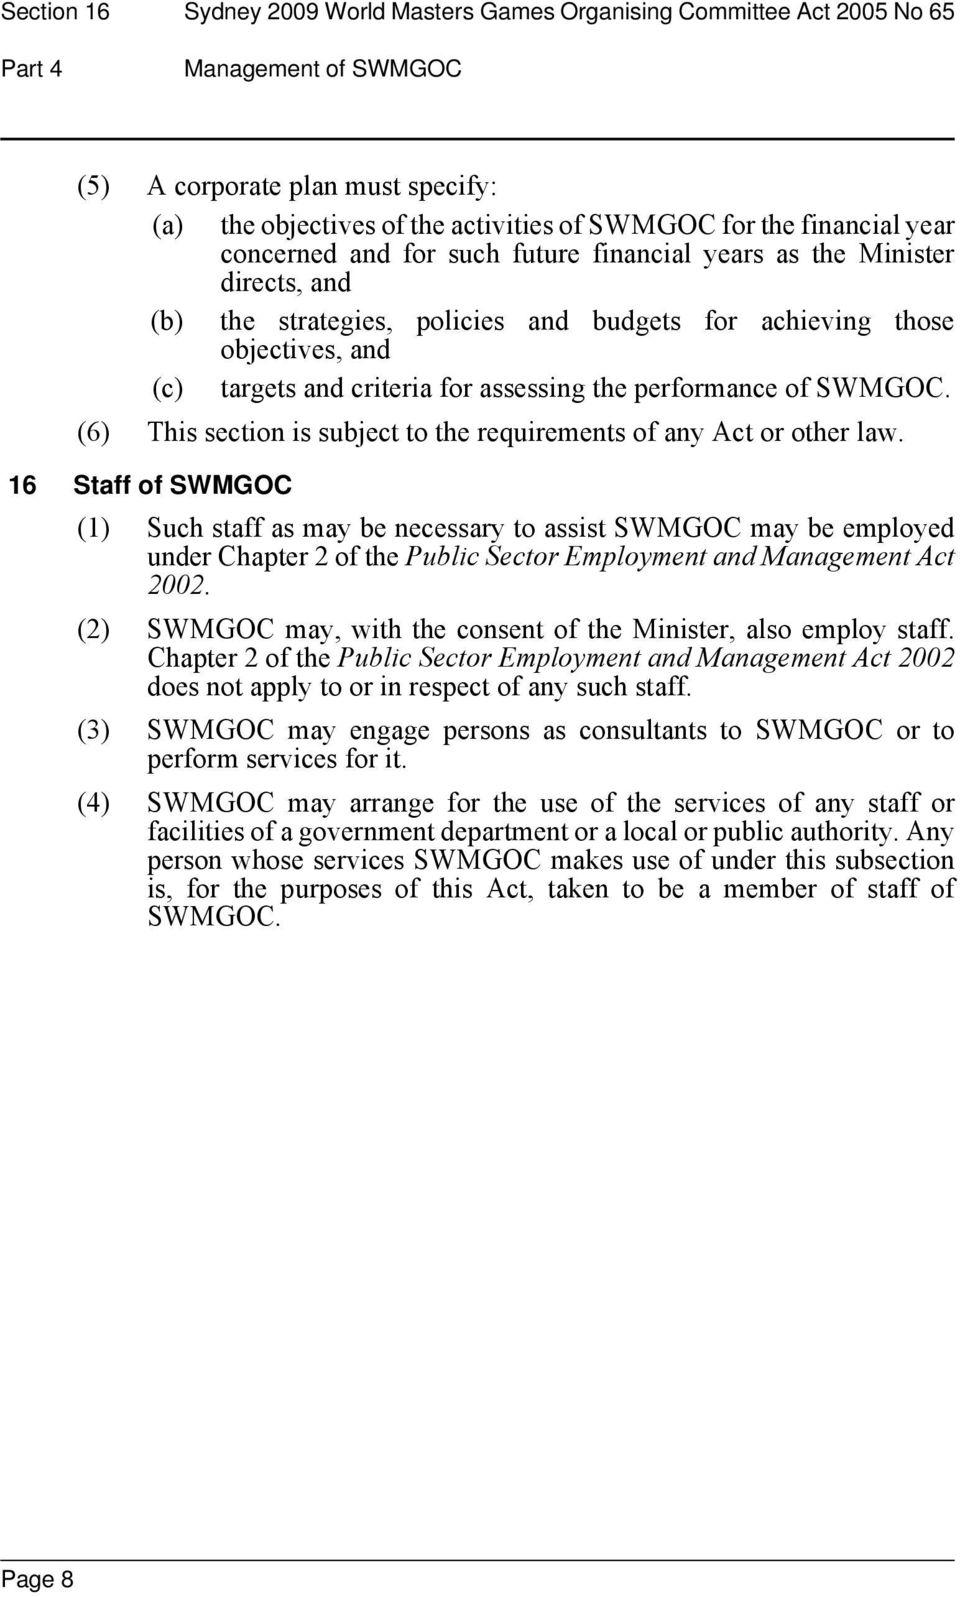 assessing the performance of SWMGOC. (6) This section is subject to the requirements of any Act or other law.